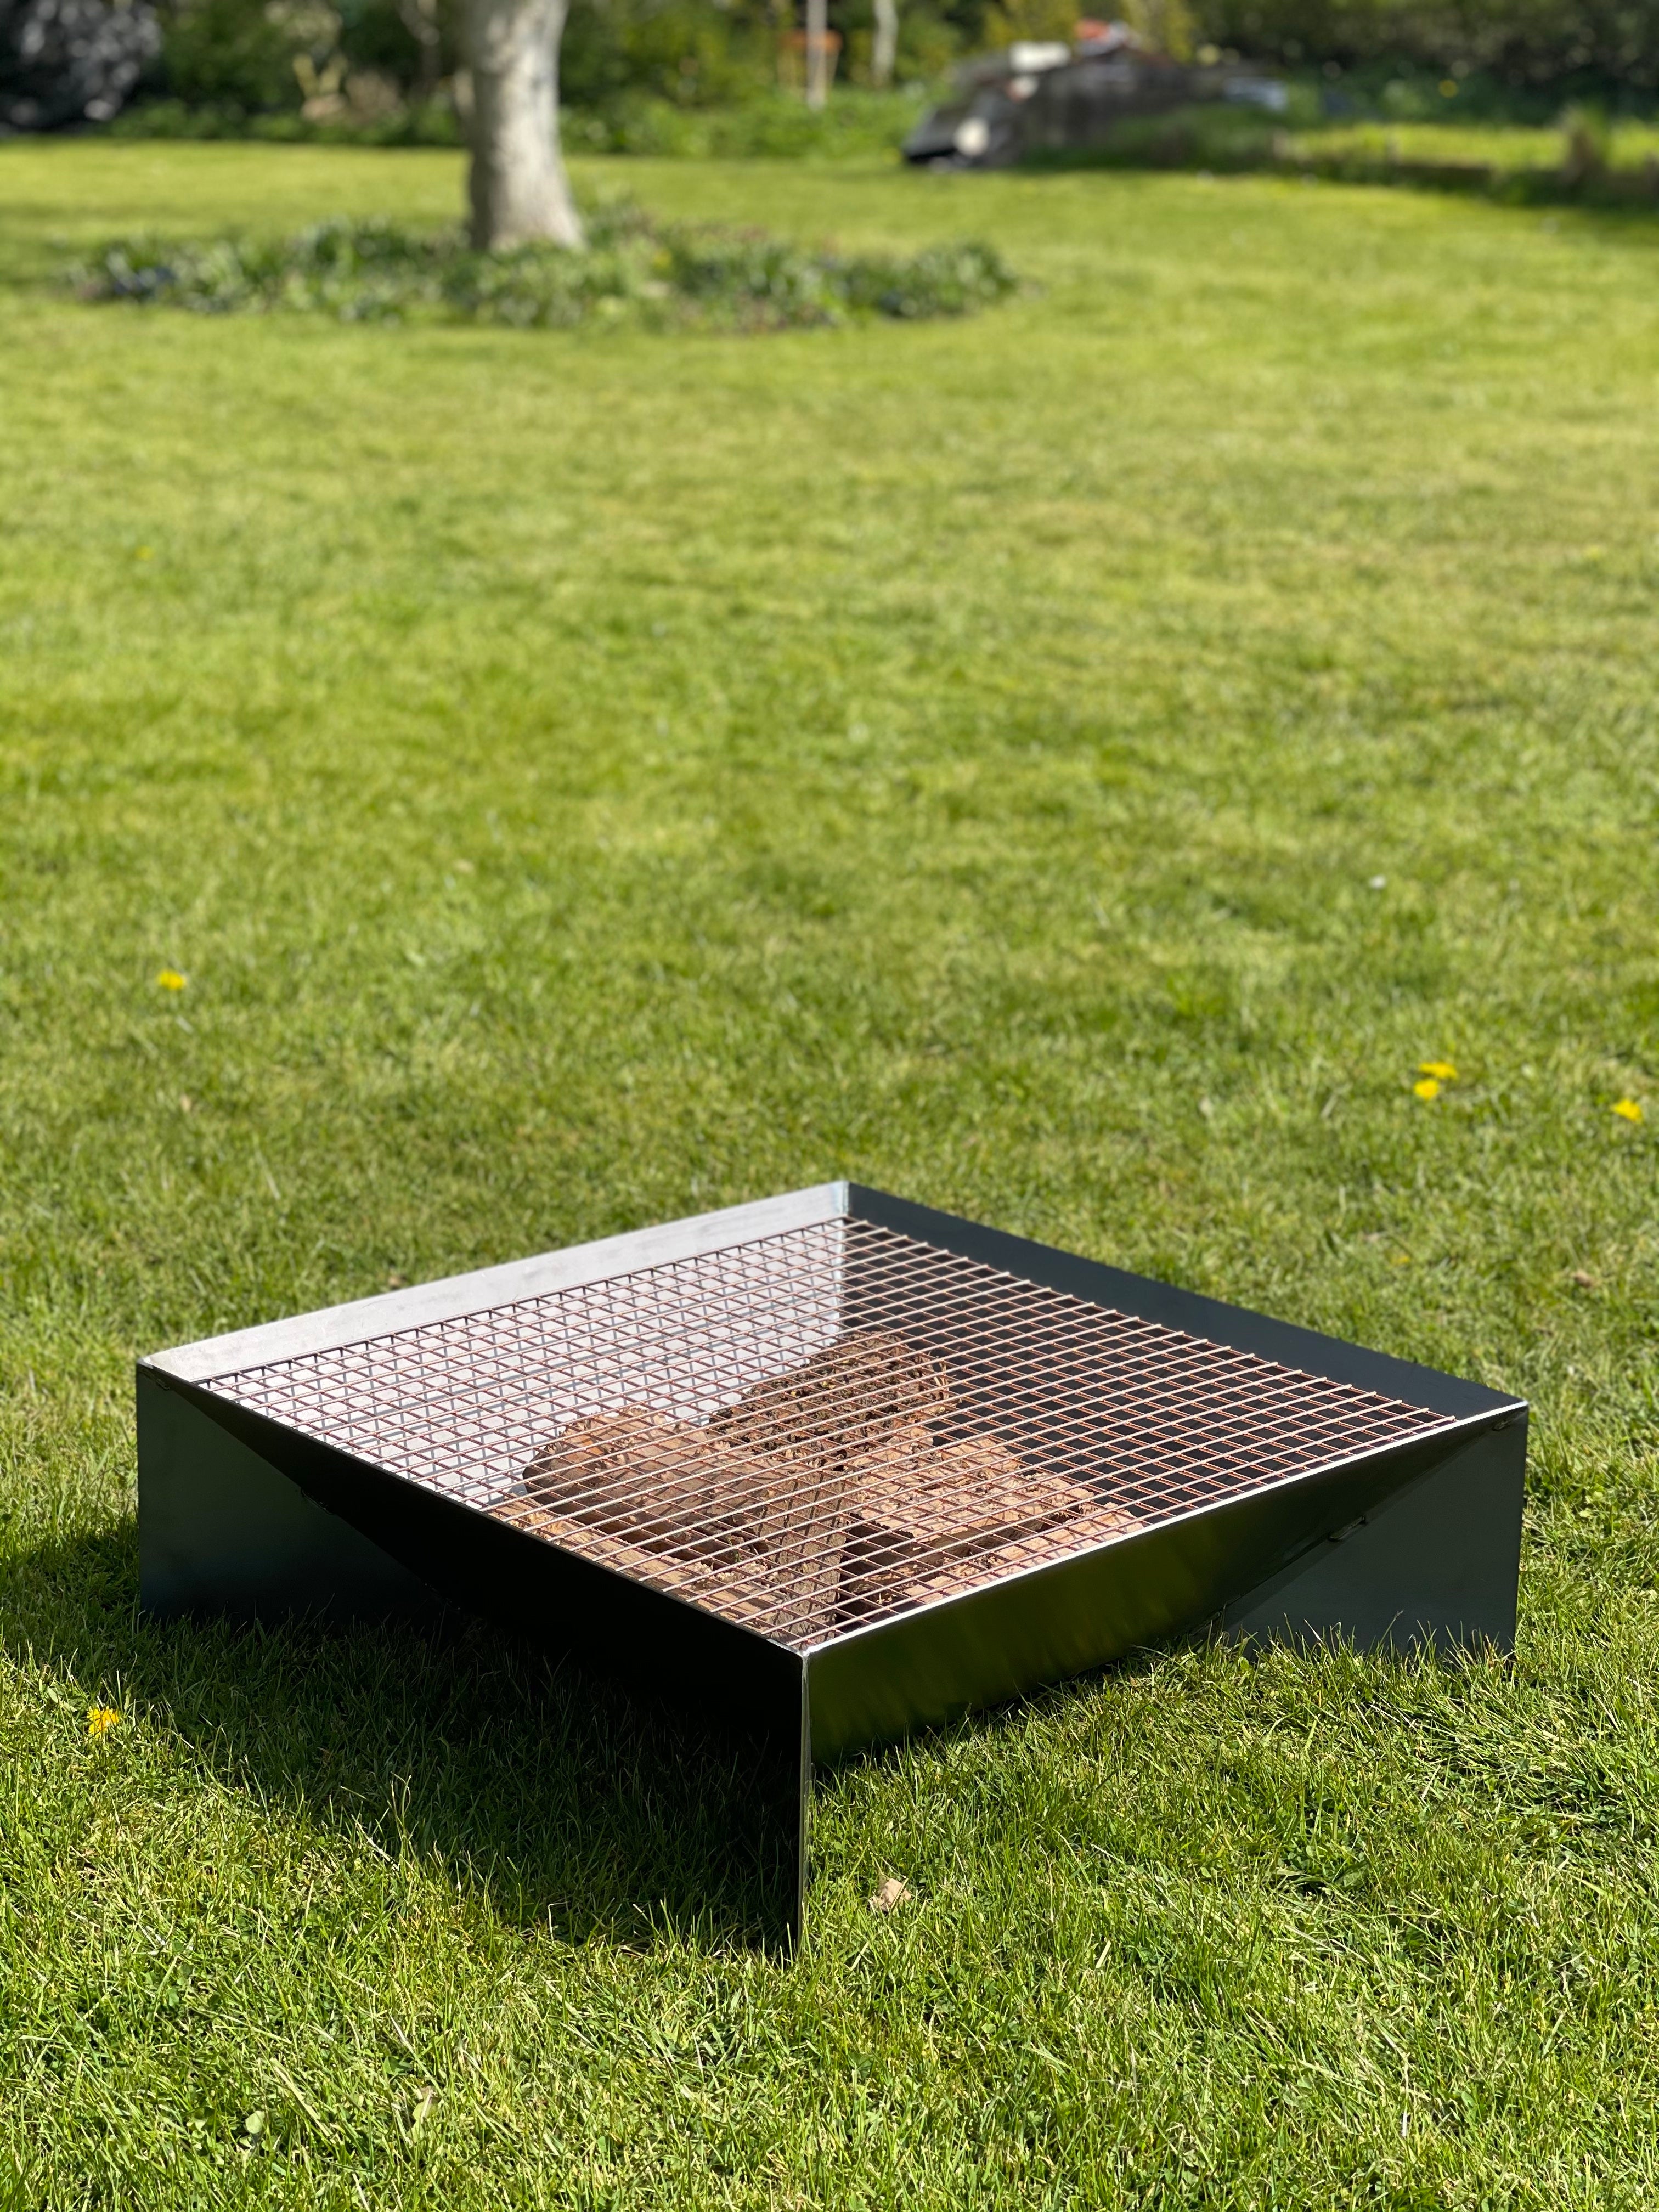 Oxford Handmade Fire pit with Grill Mesh for Garden